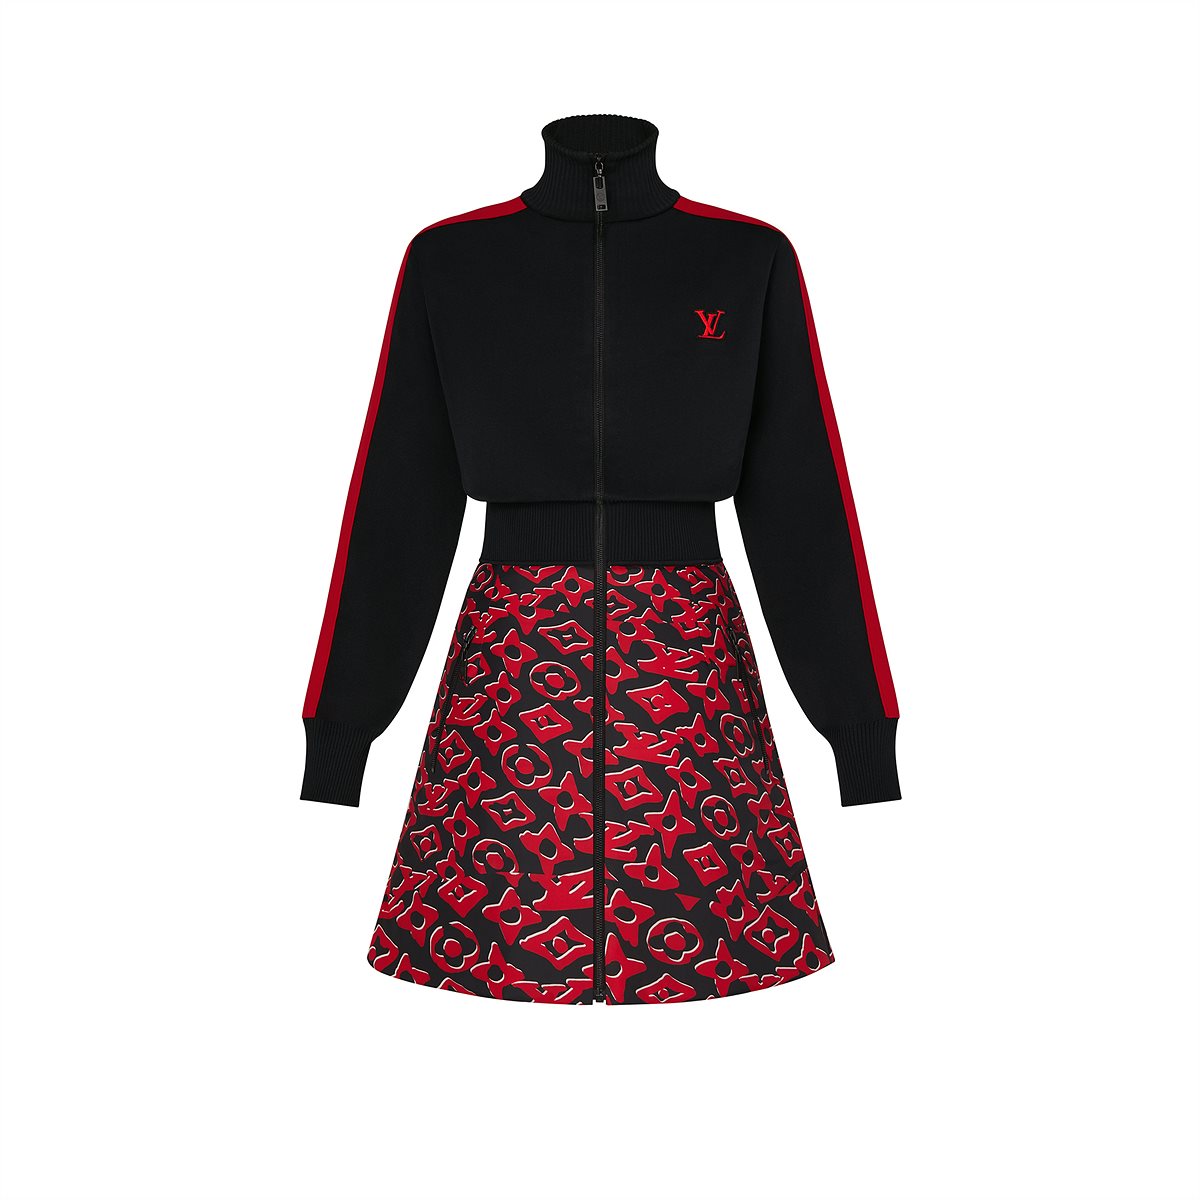 LV_Bi-material dress Louis Vuitton x Urs Fischer in knit and quilted nylon_EUR 1900,-